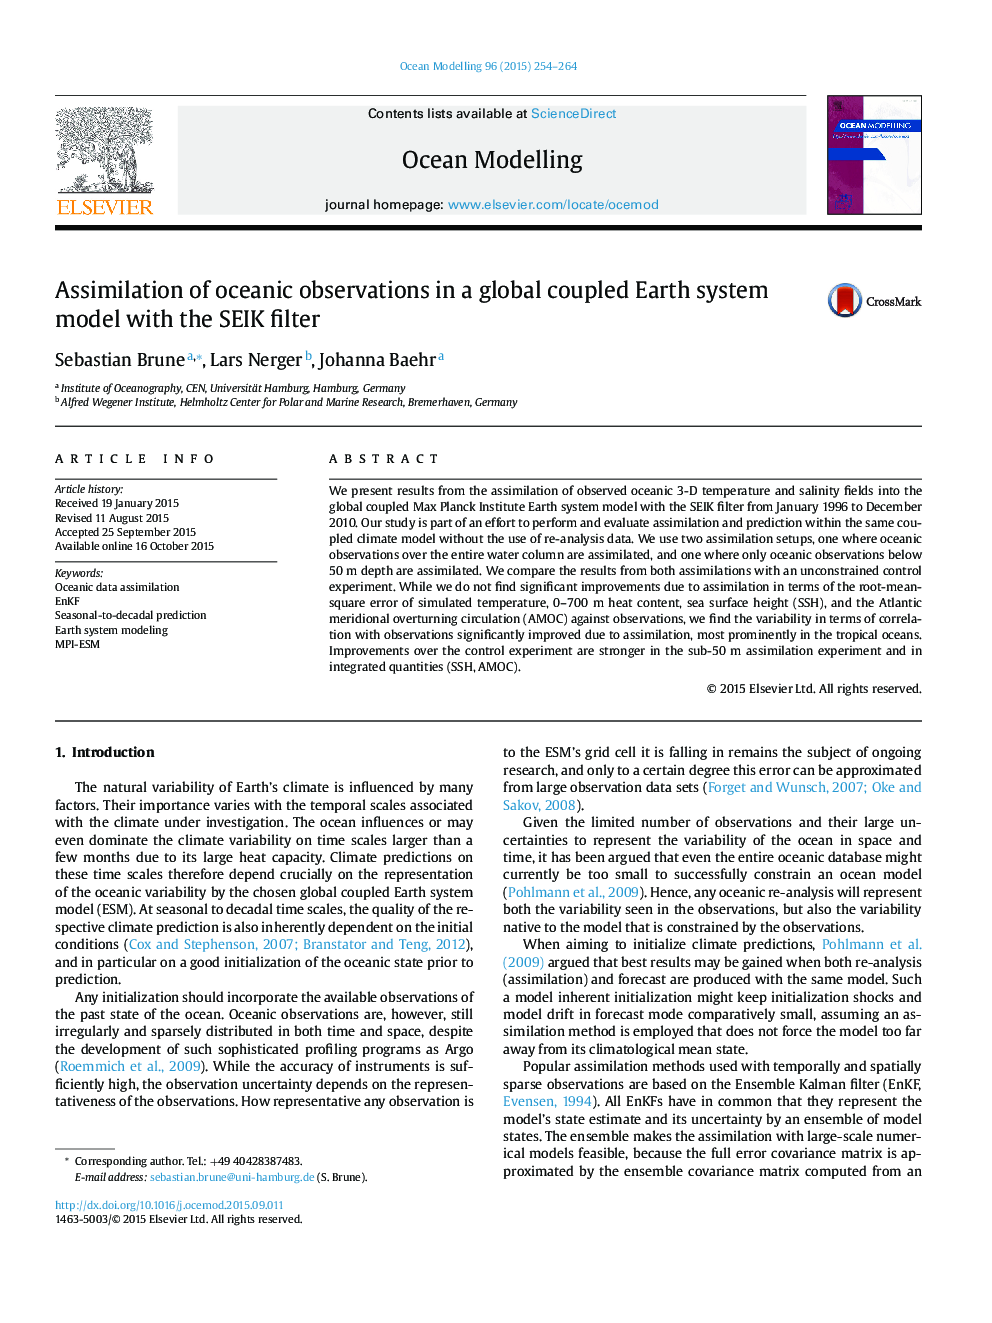 Assimilation of oceanic observations in a global coupled Earth system model with the SEIK filter